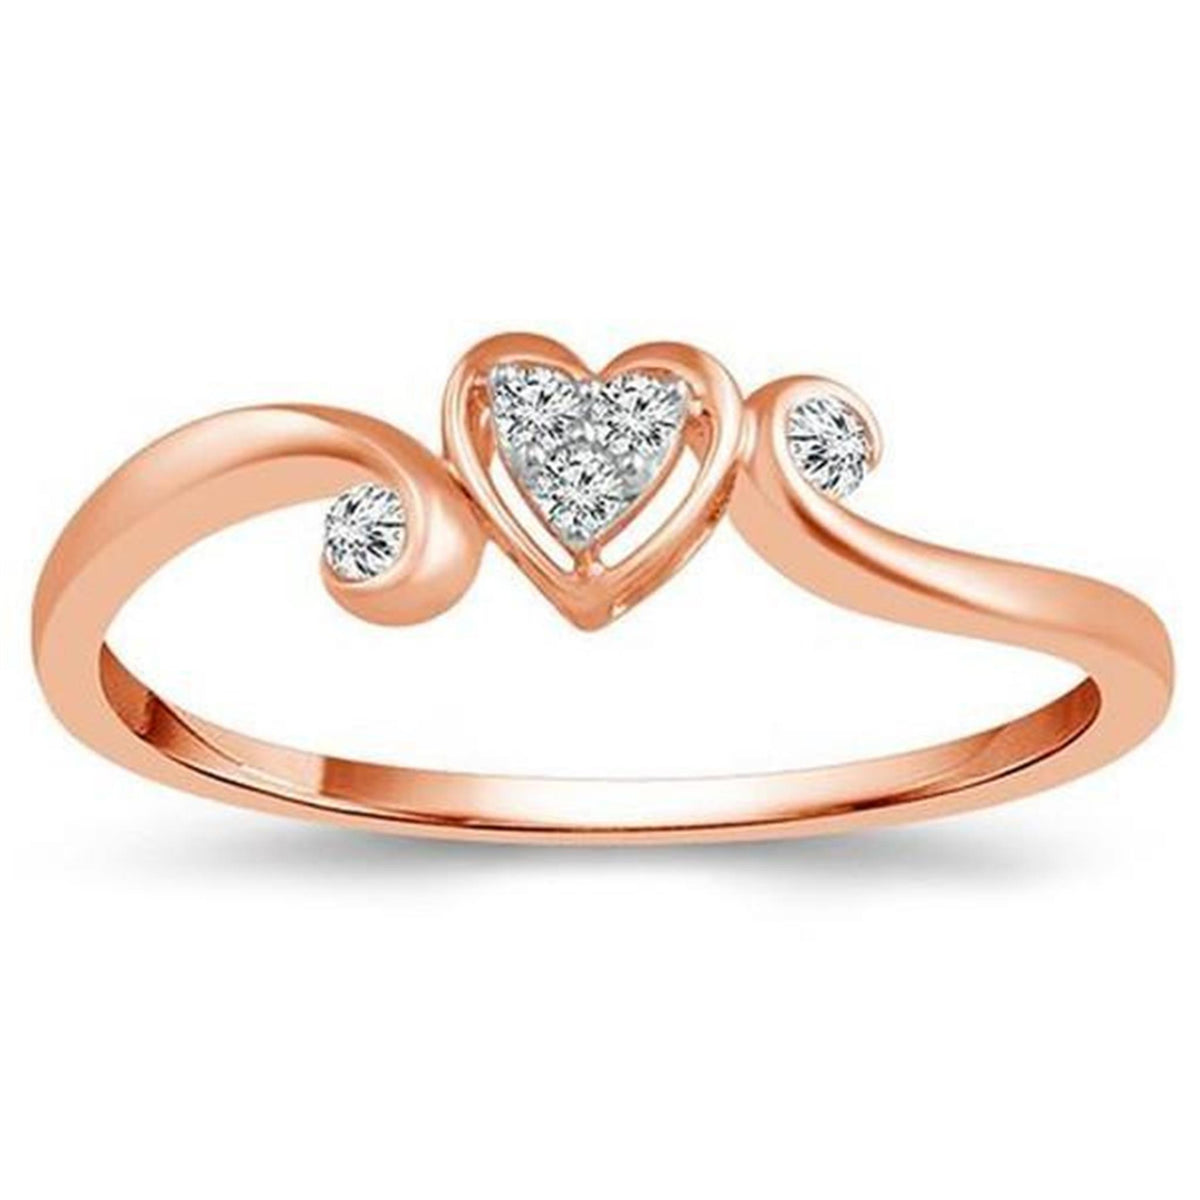 10Kt Rose Gold Heart Promise Ring With 0.08cttw Natural Diamonds